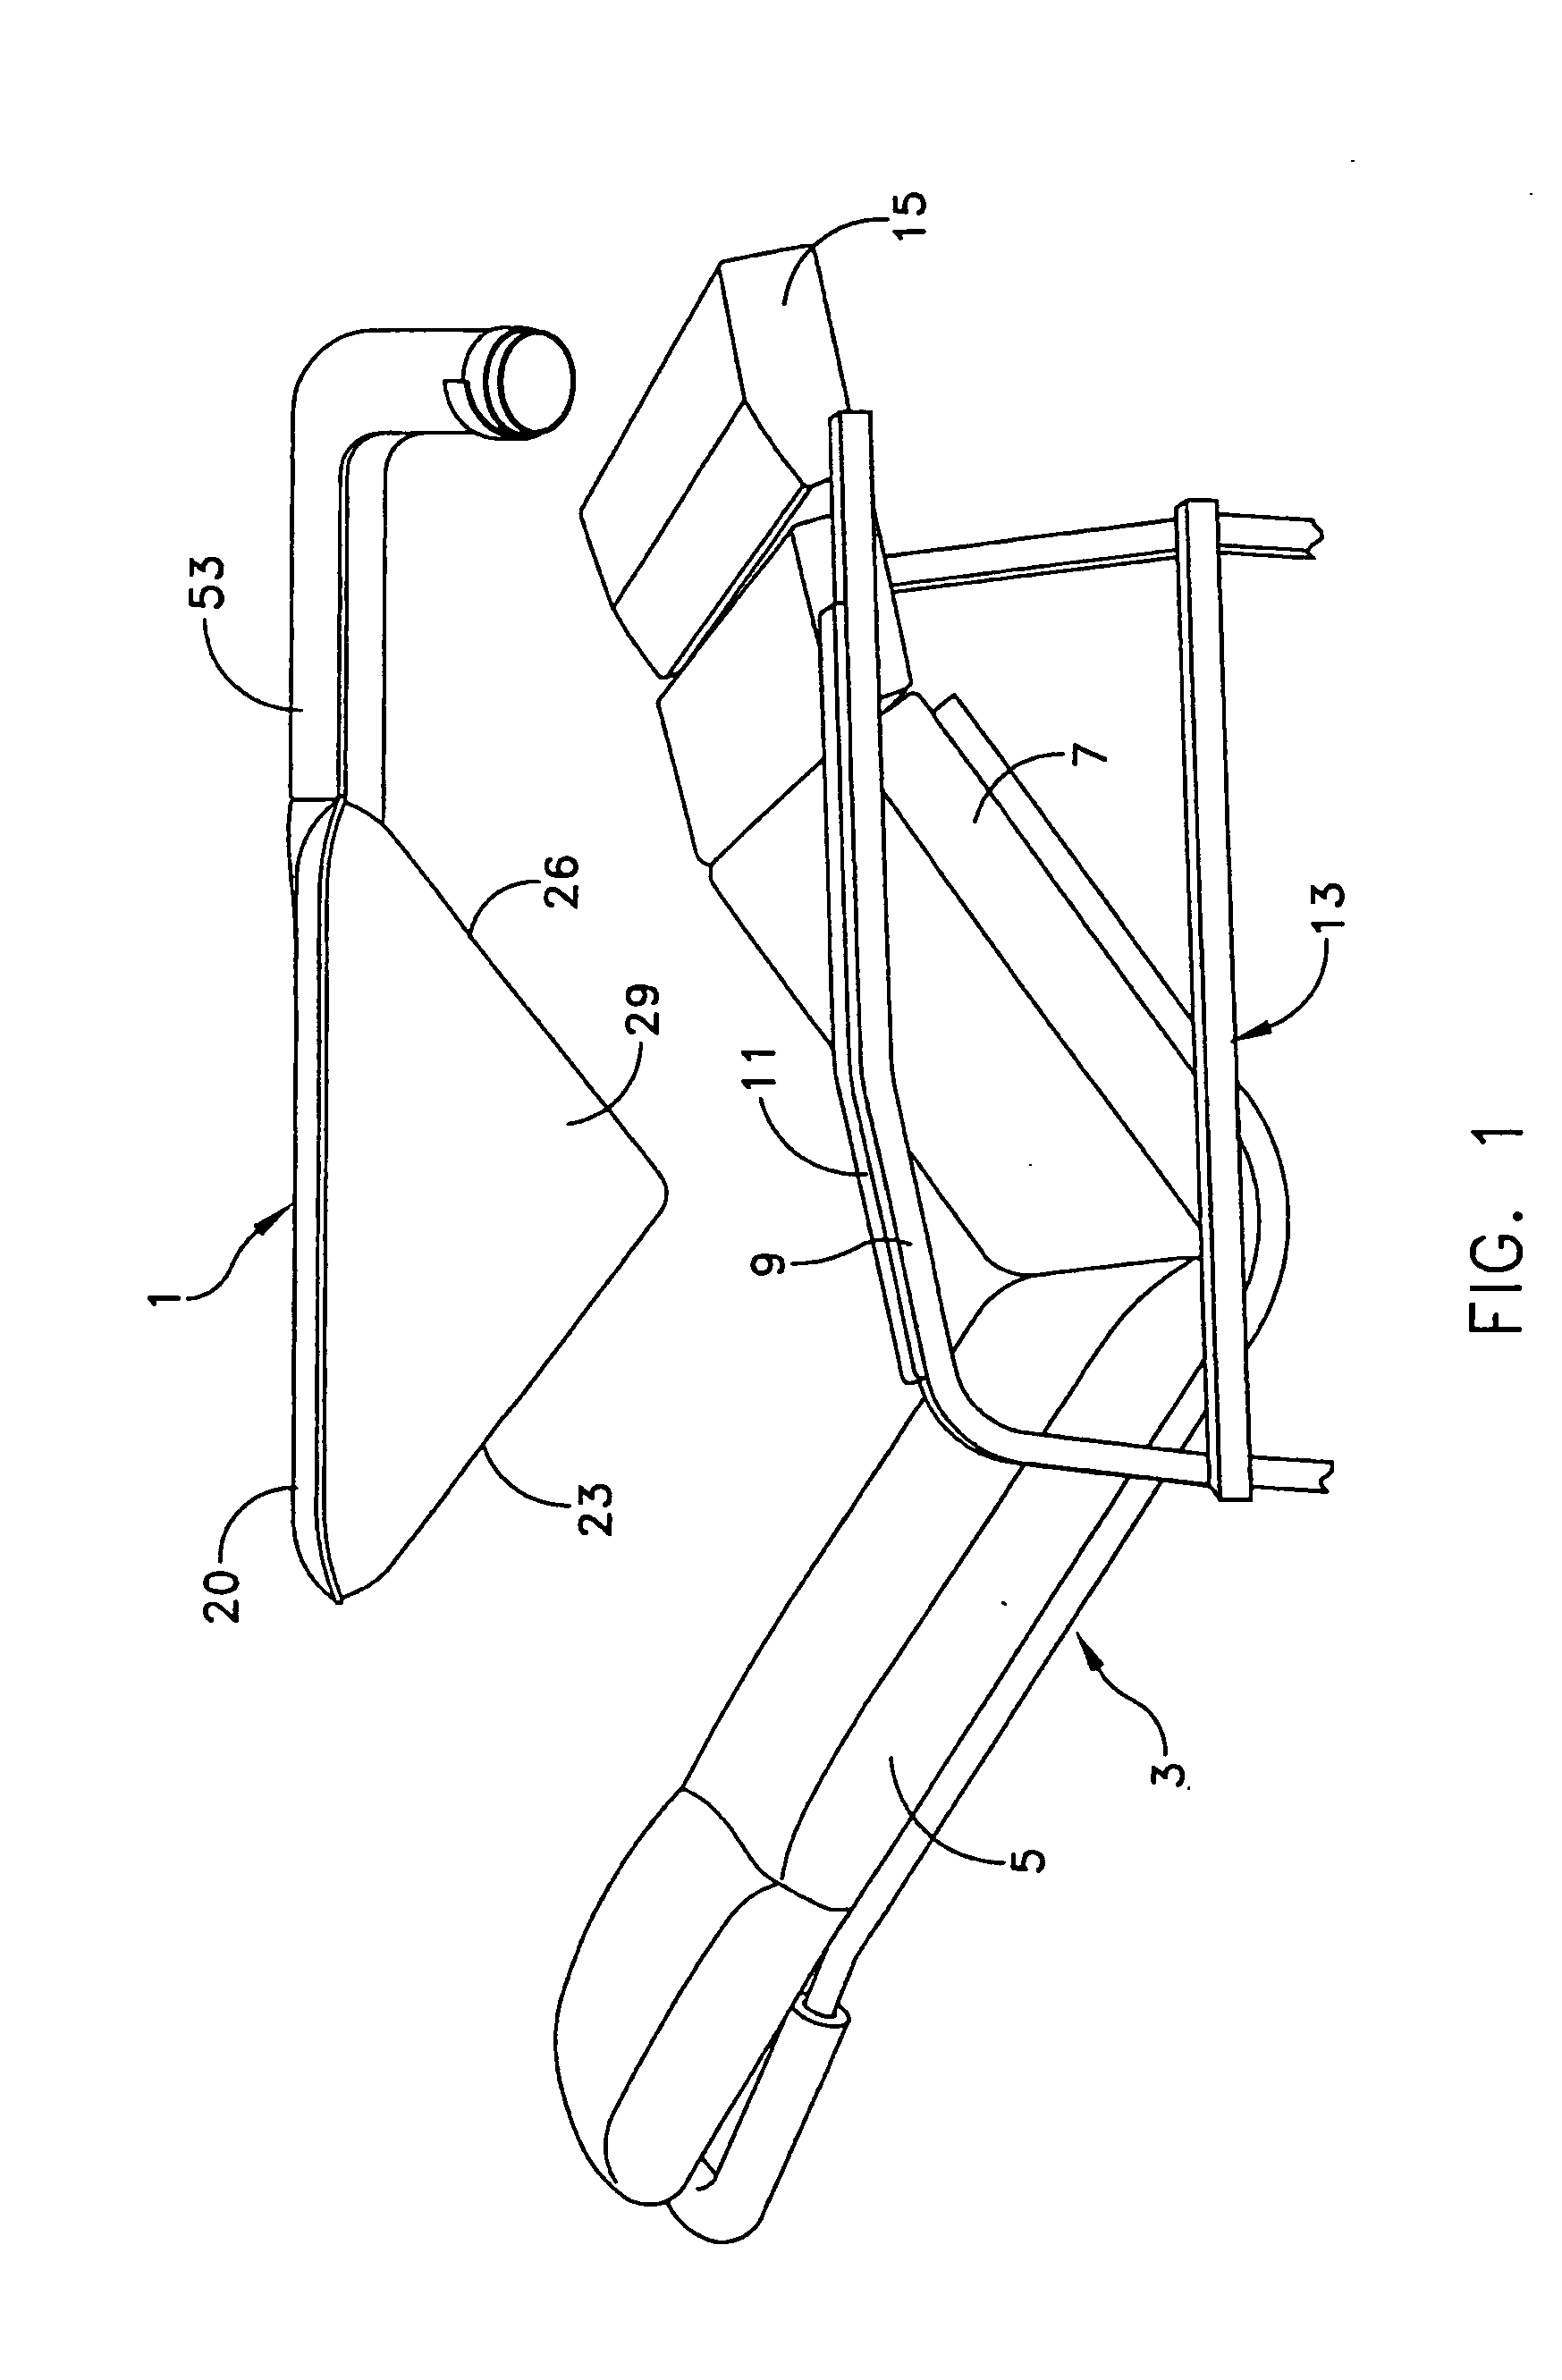 Lifting cushion and method for transferring a patient from a chair